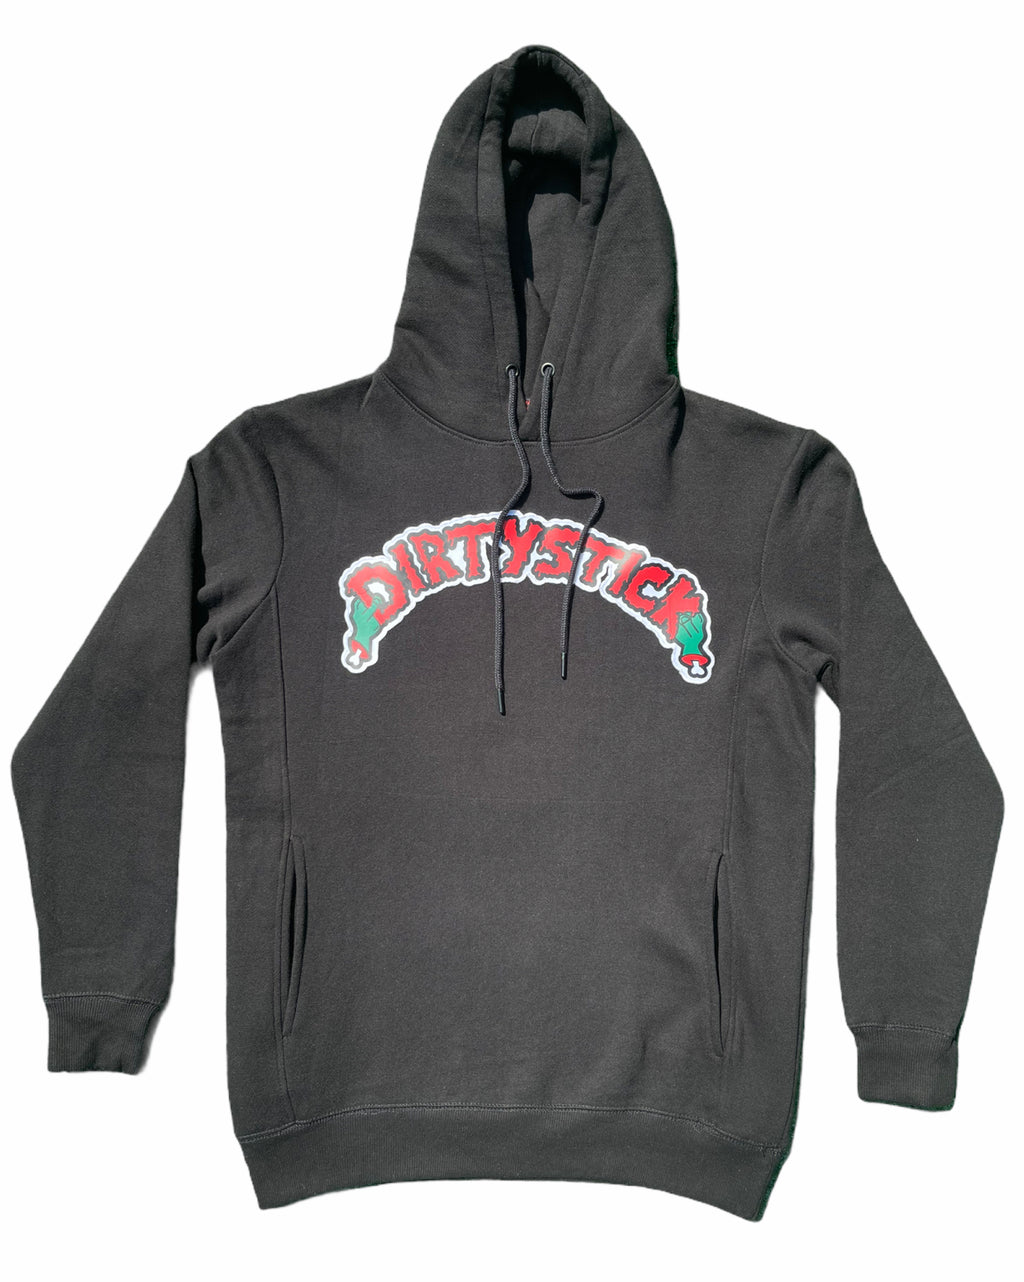 Hoodie/Zombie Hand/Black/Green And Red Logo